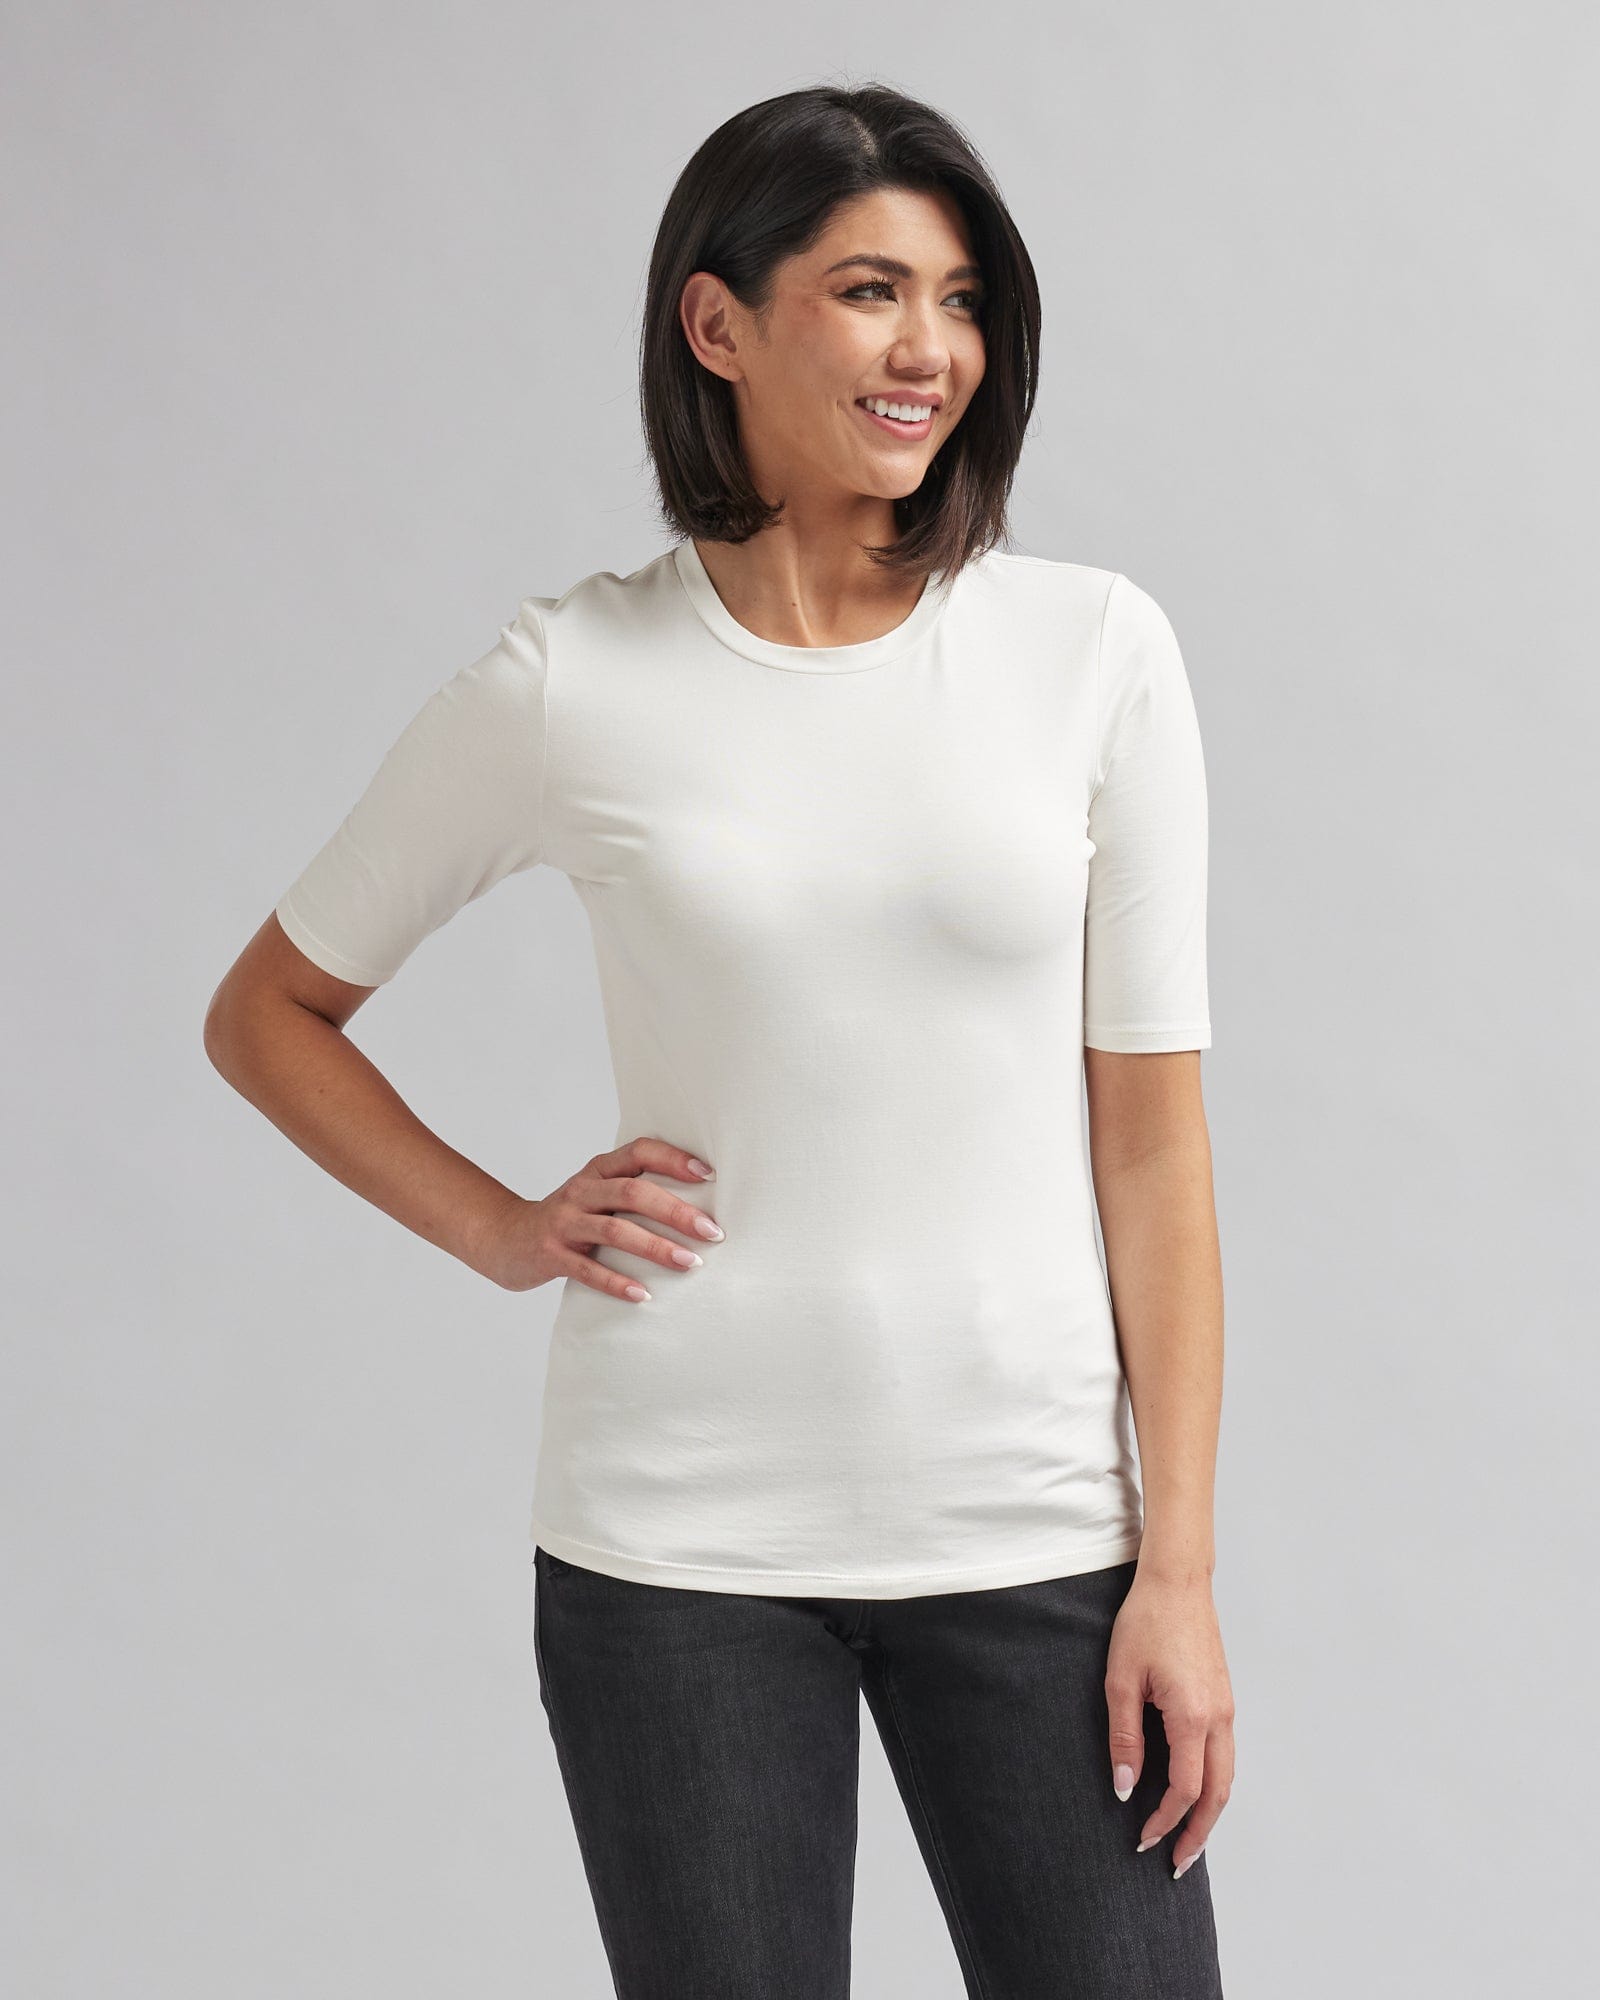 Woman in a half sleeved, basic t-shirt